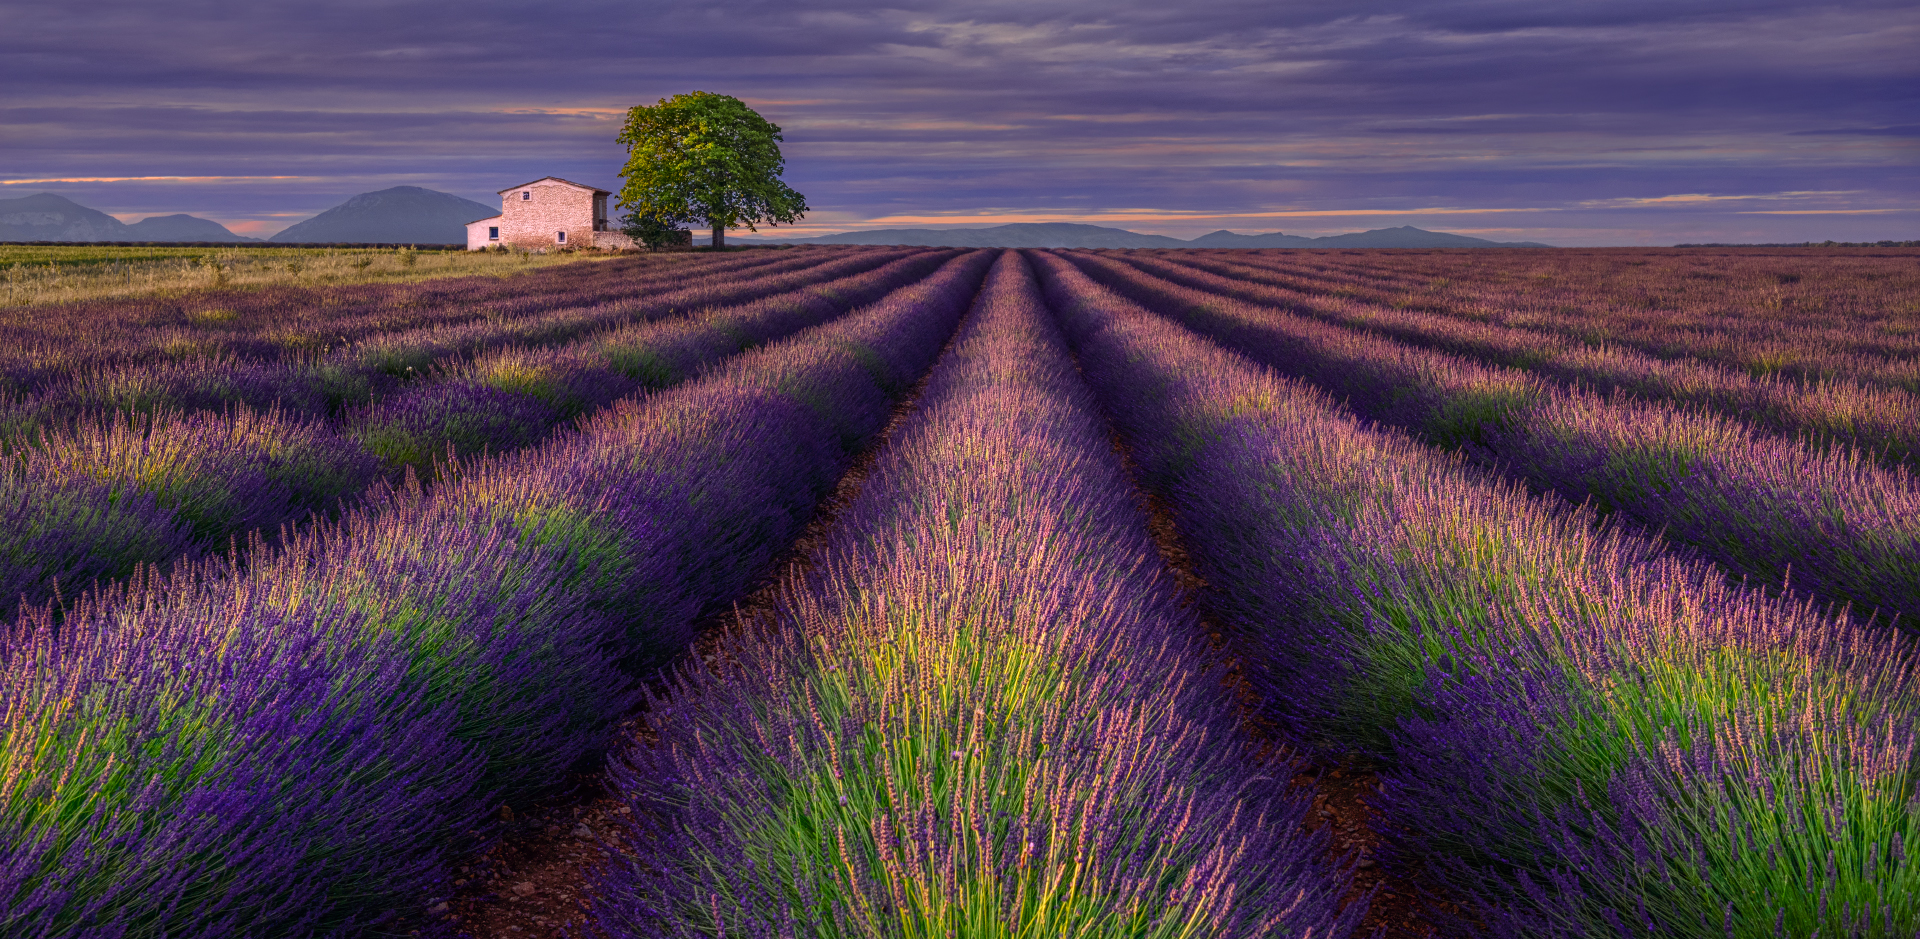 Lavender field on the Valensole plateau, Provence, France